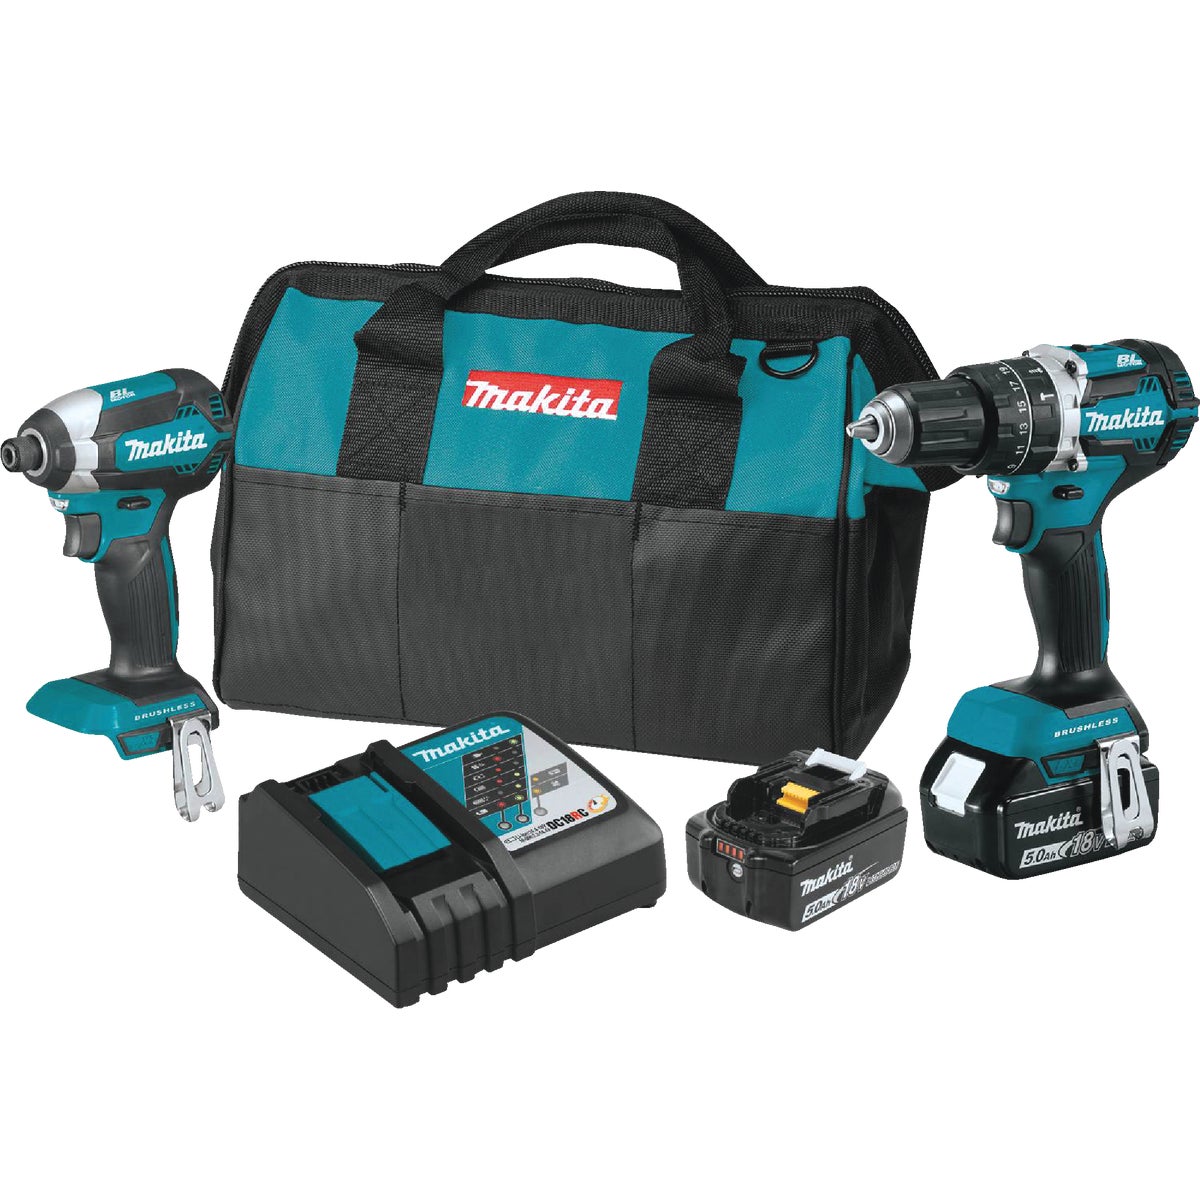 Makita 2-Tool 18 Volt LXT Lithium-Ion Brushless Compact Hammer Drill/Driver & Impact Driver Cordless Tool Combo Kit